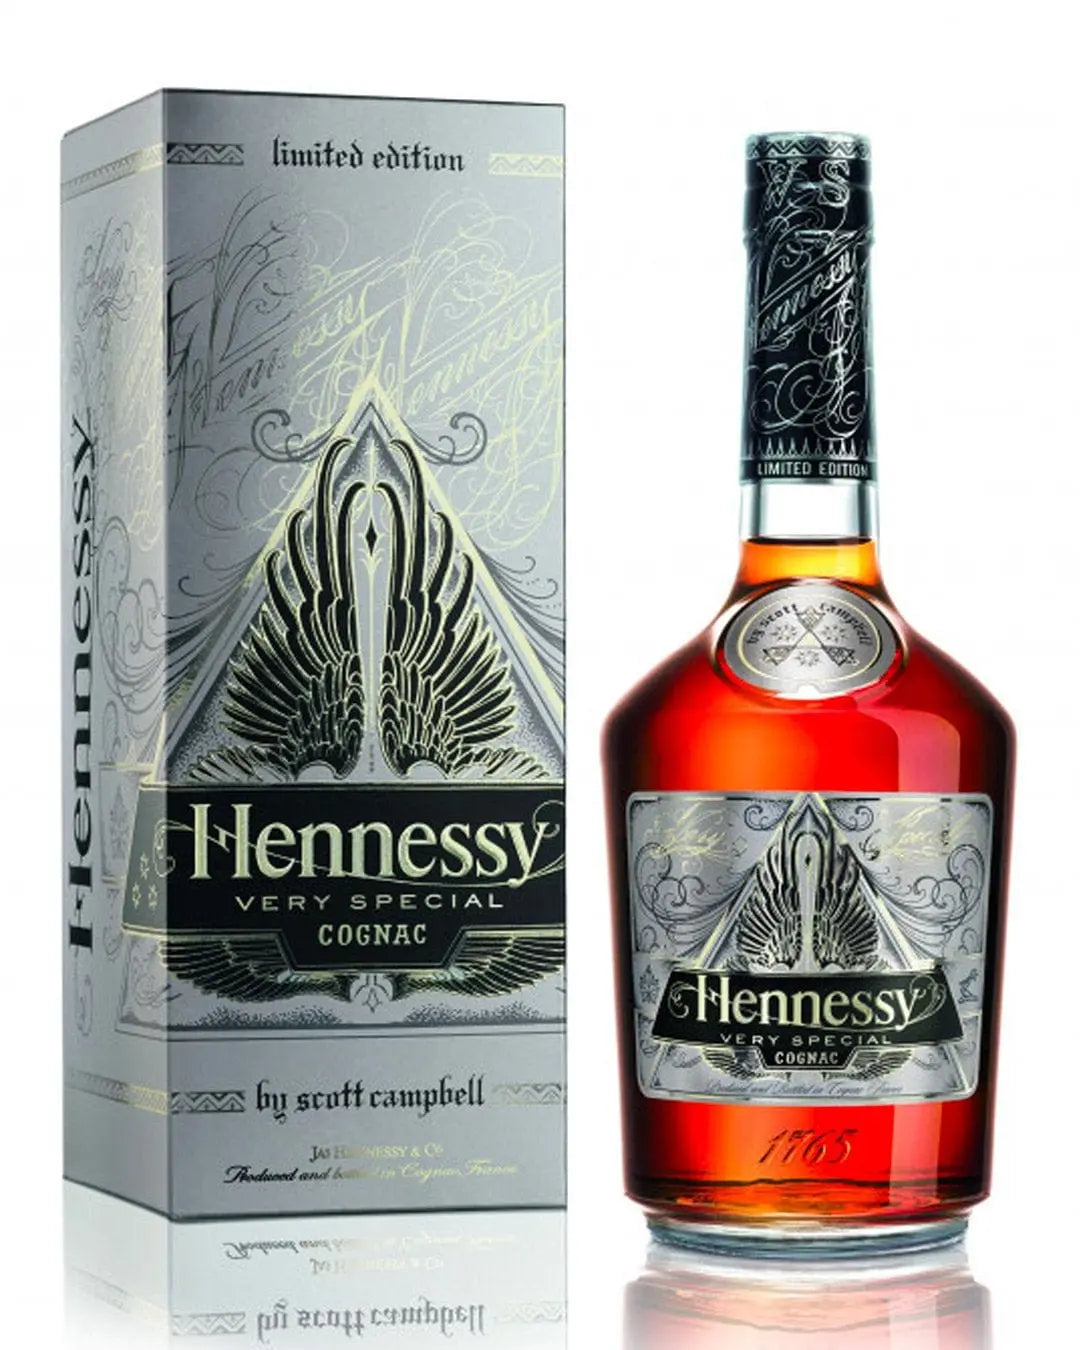 Limited Edition Gift Box Hennessy Vs Scott Campbell, 70 cl Cognac & Brandy